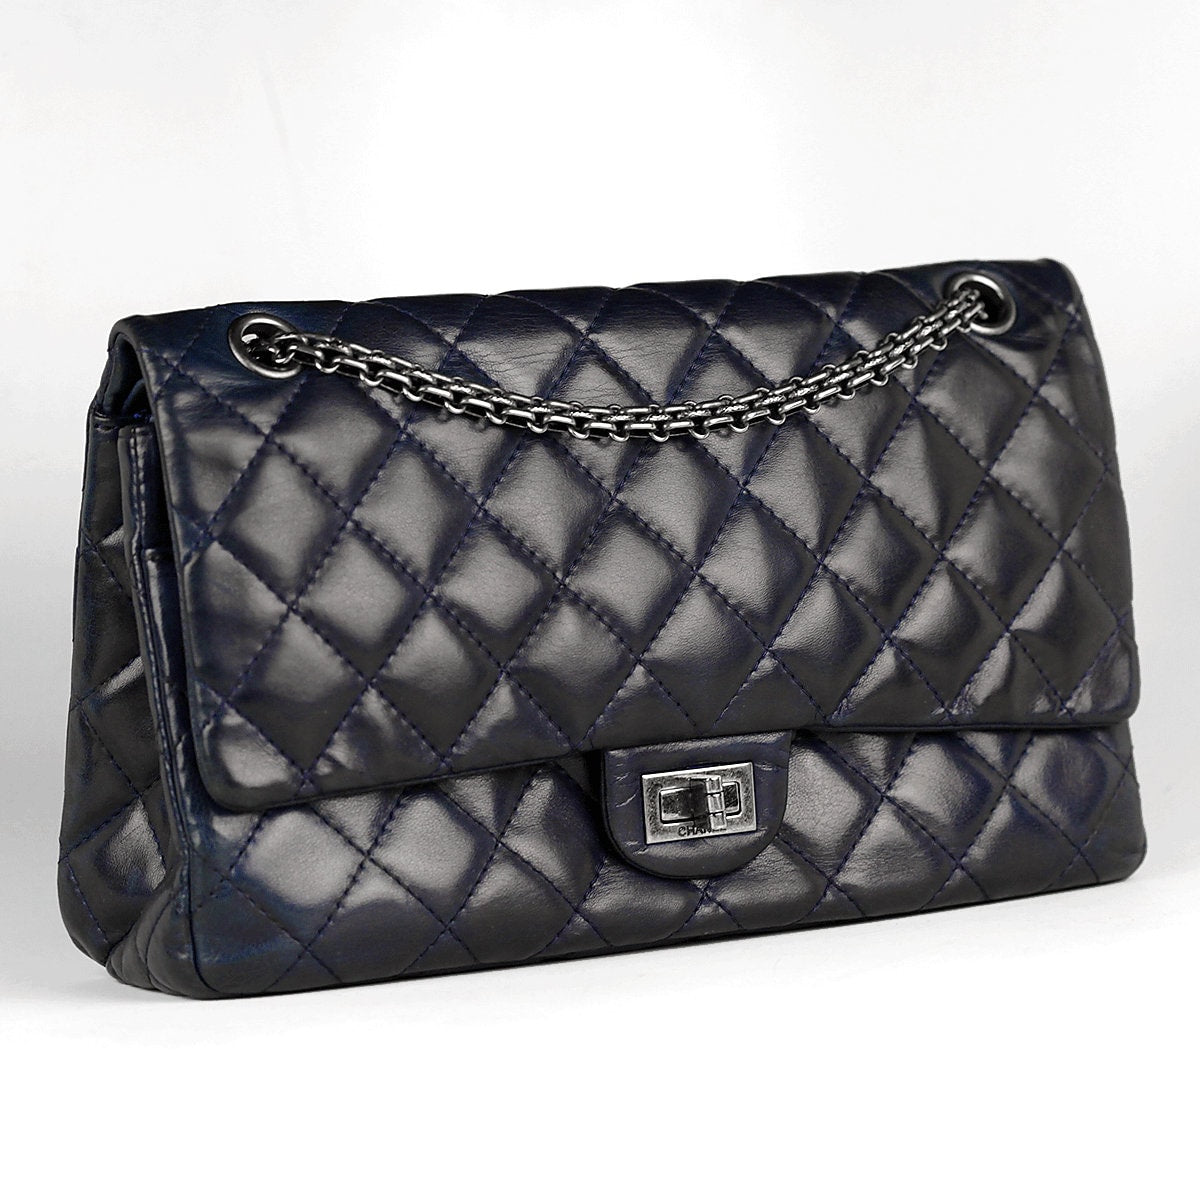 Chanel Bag 2.55 Reissue Navy Calfskin Leather with Silver Hardware 226